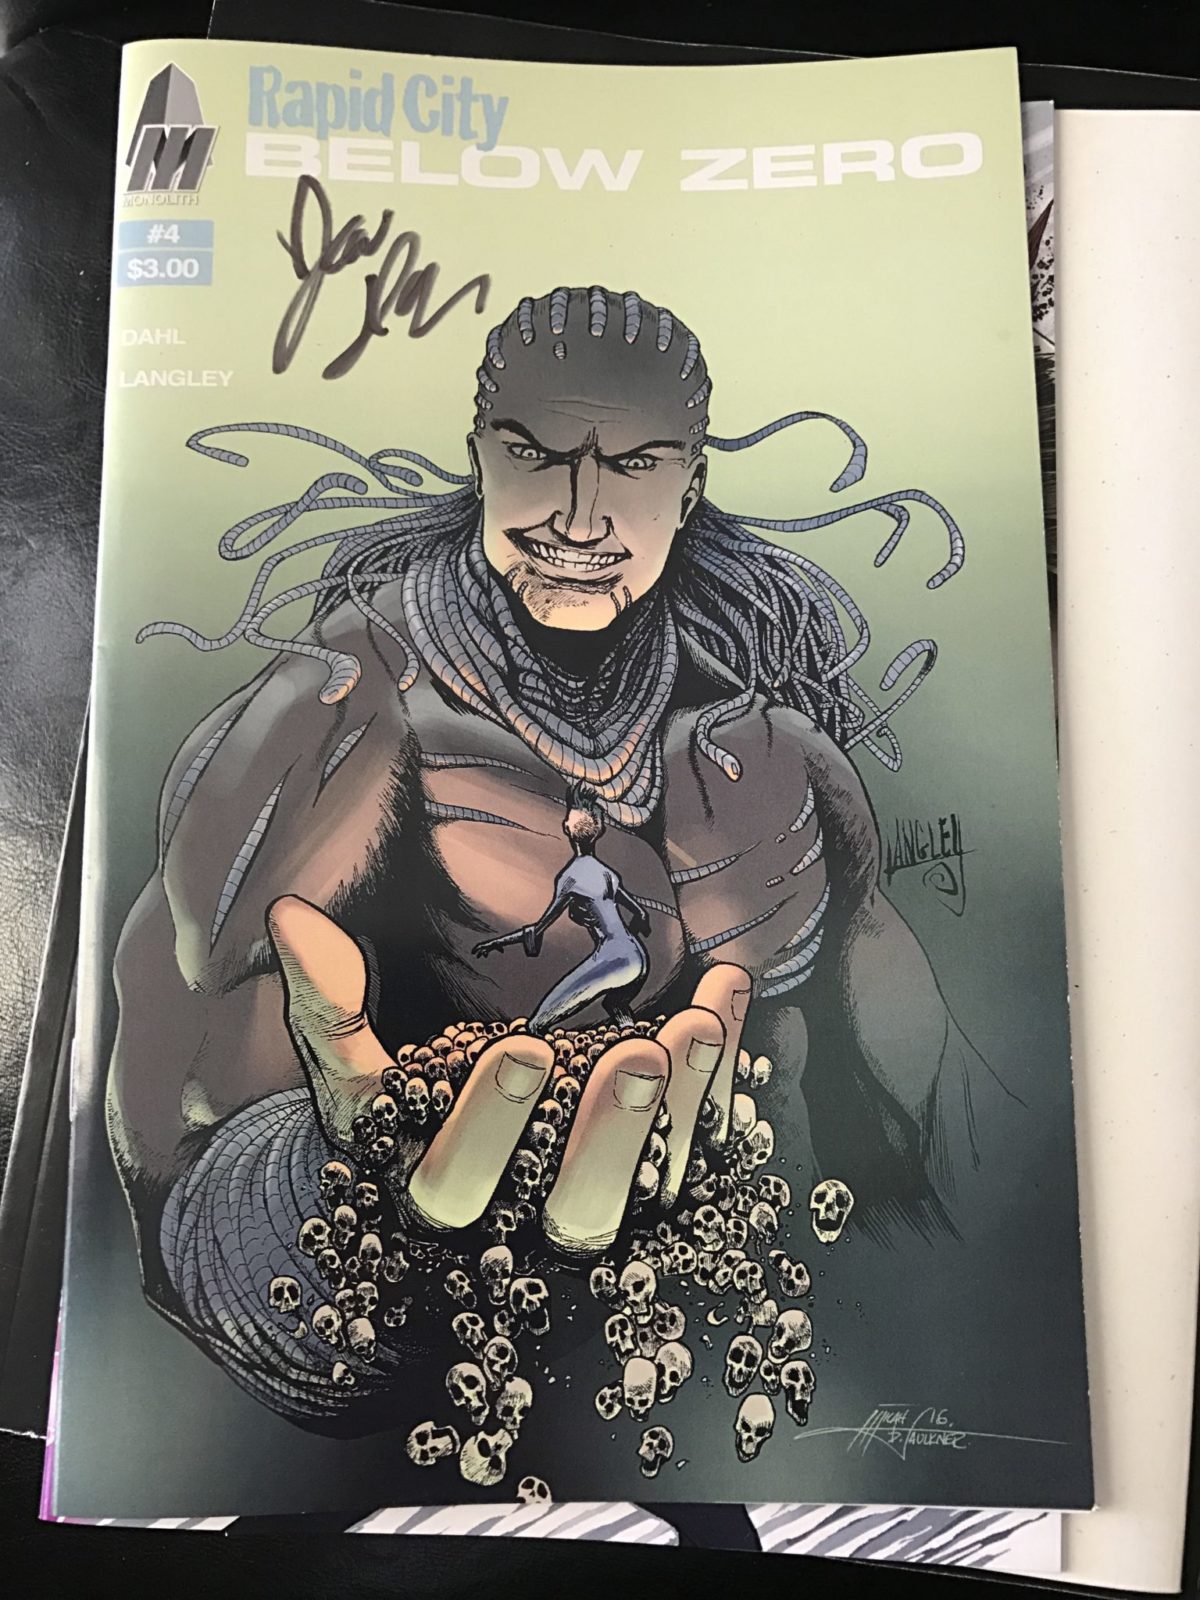 ART OF THE DAY: NYCC COVERS WEEK Josh Dahl